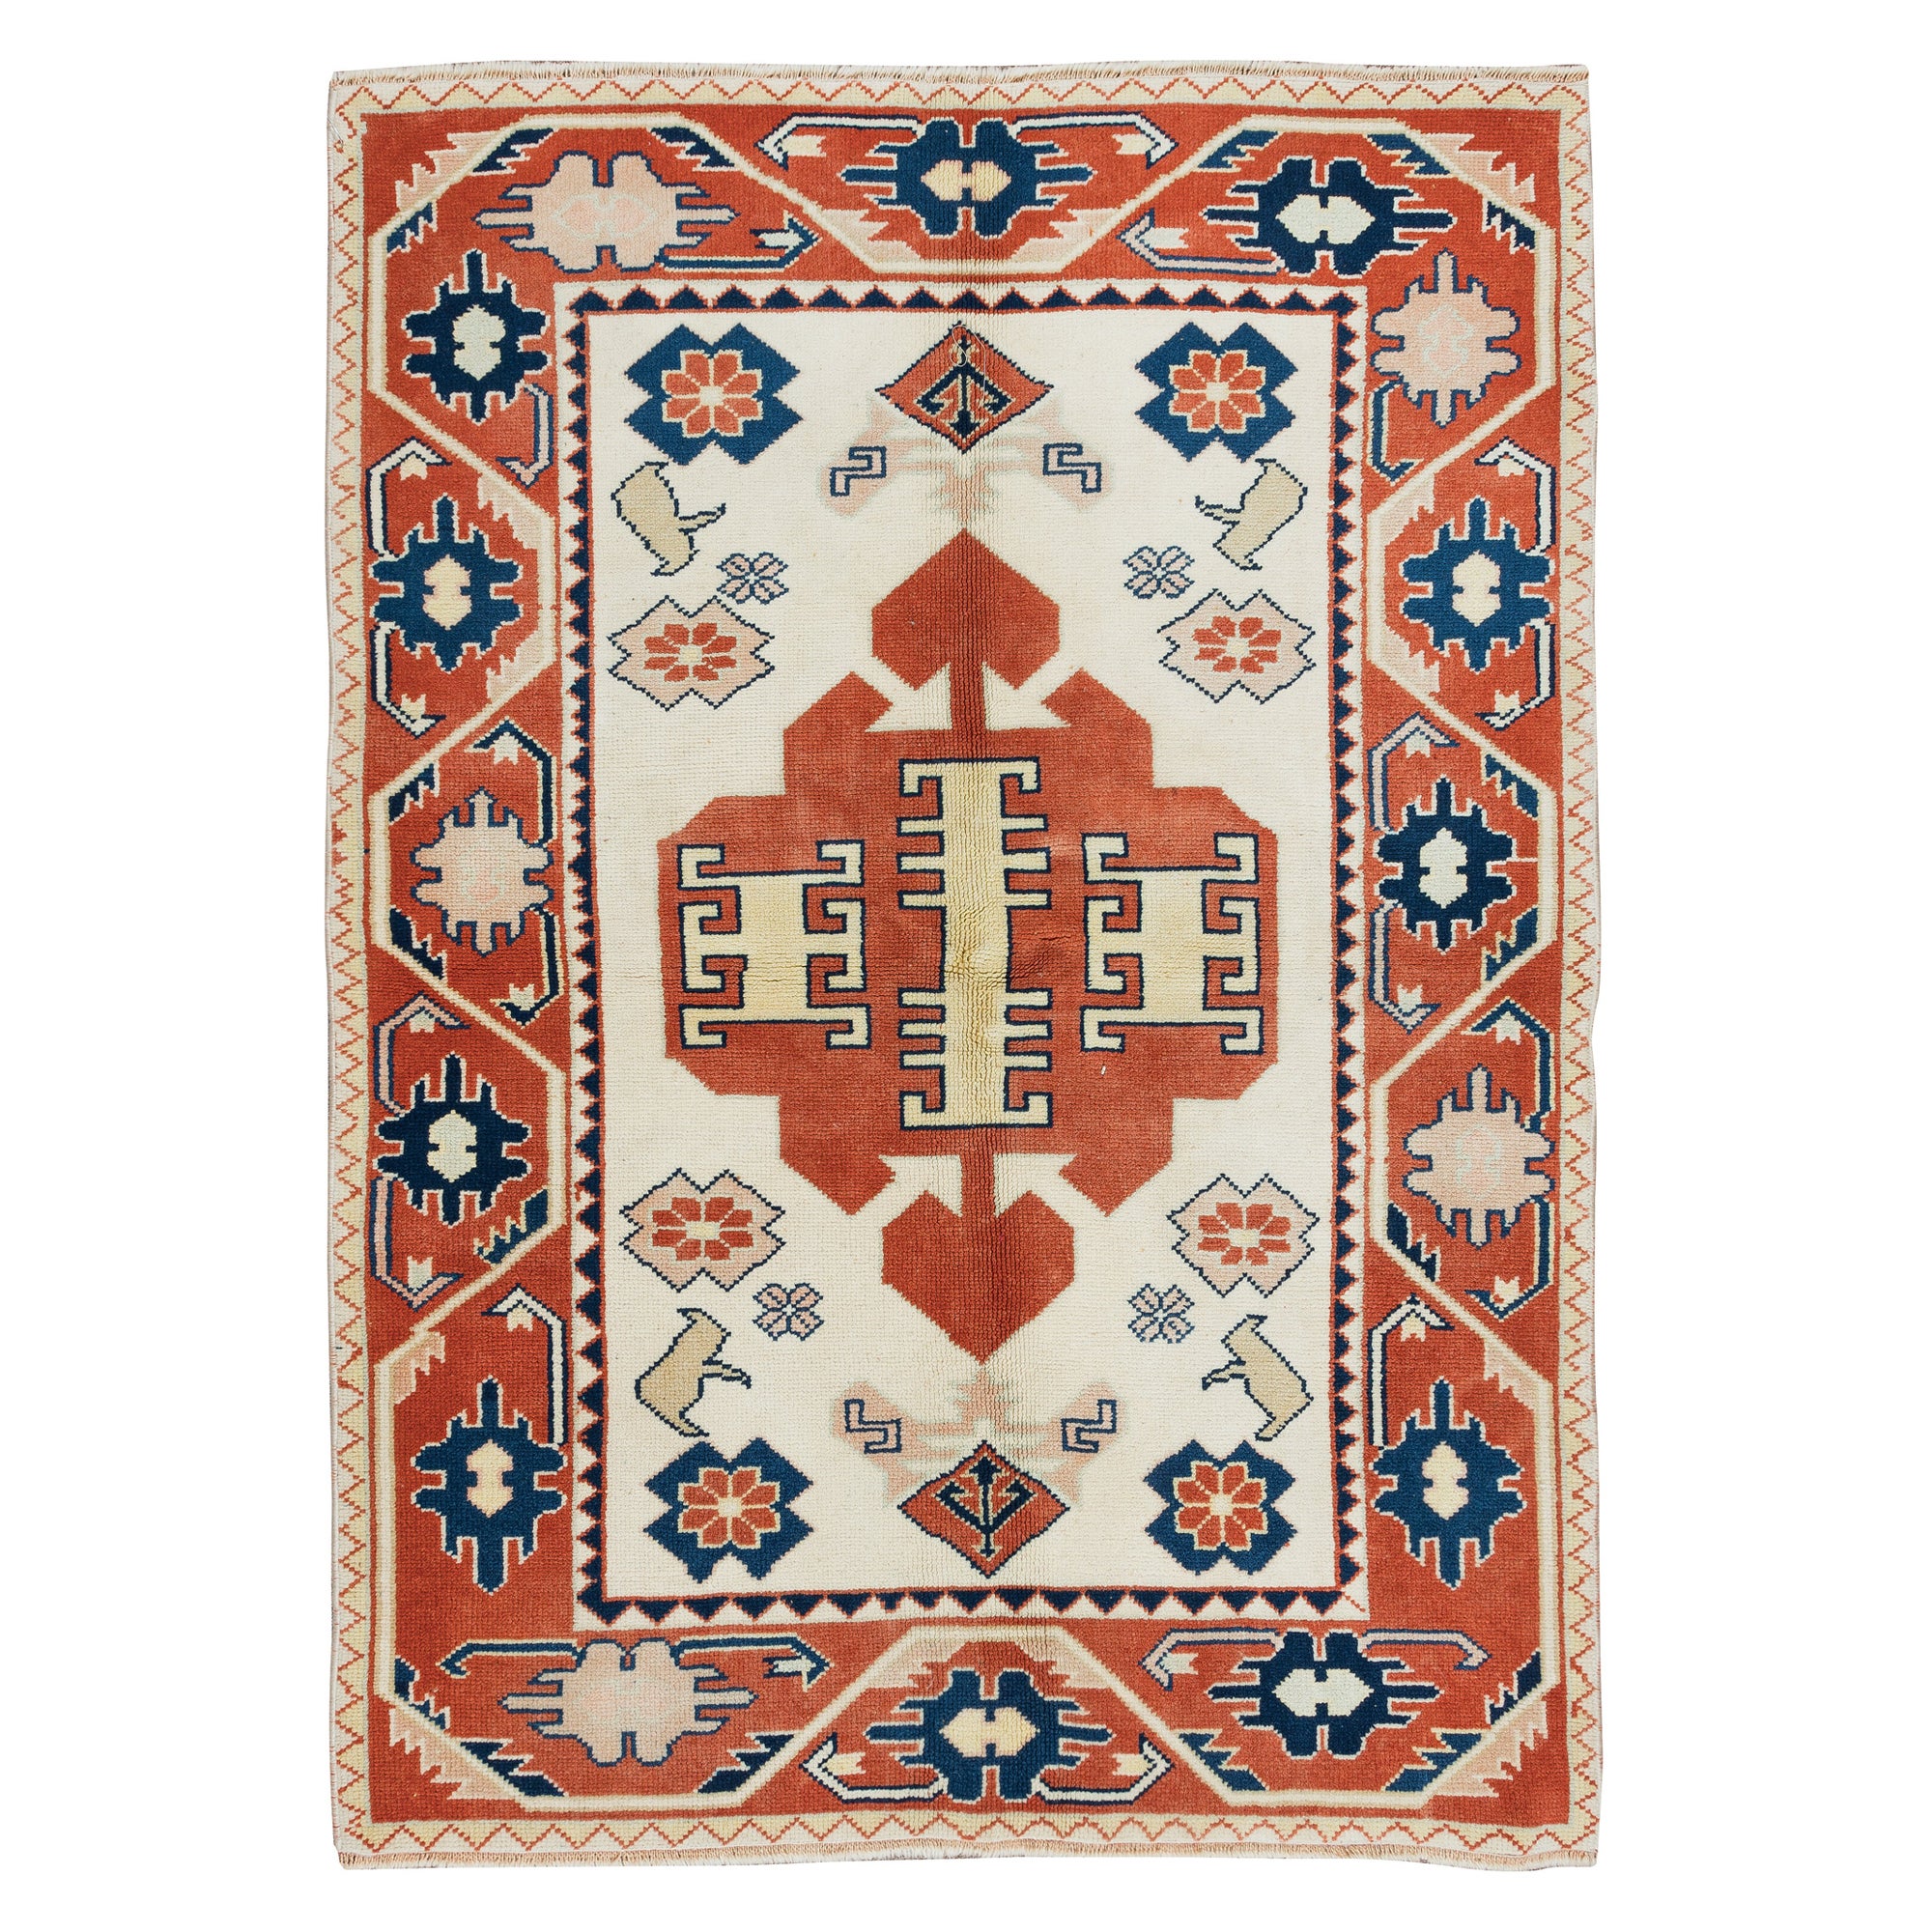 4x5.6 Ft Modern Handmade Geometric Turkish Rug in Cream, Red and Blue Colors For Sale